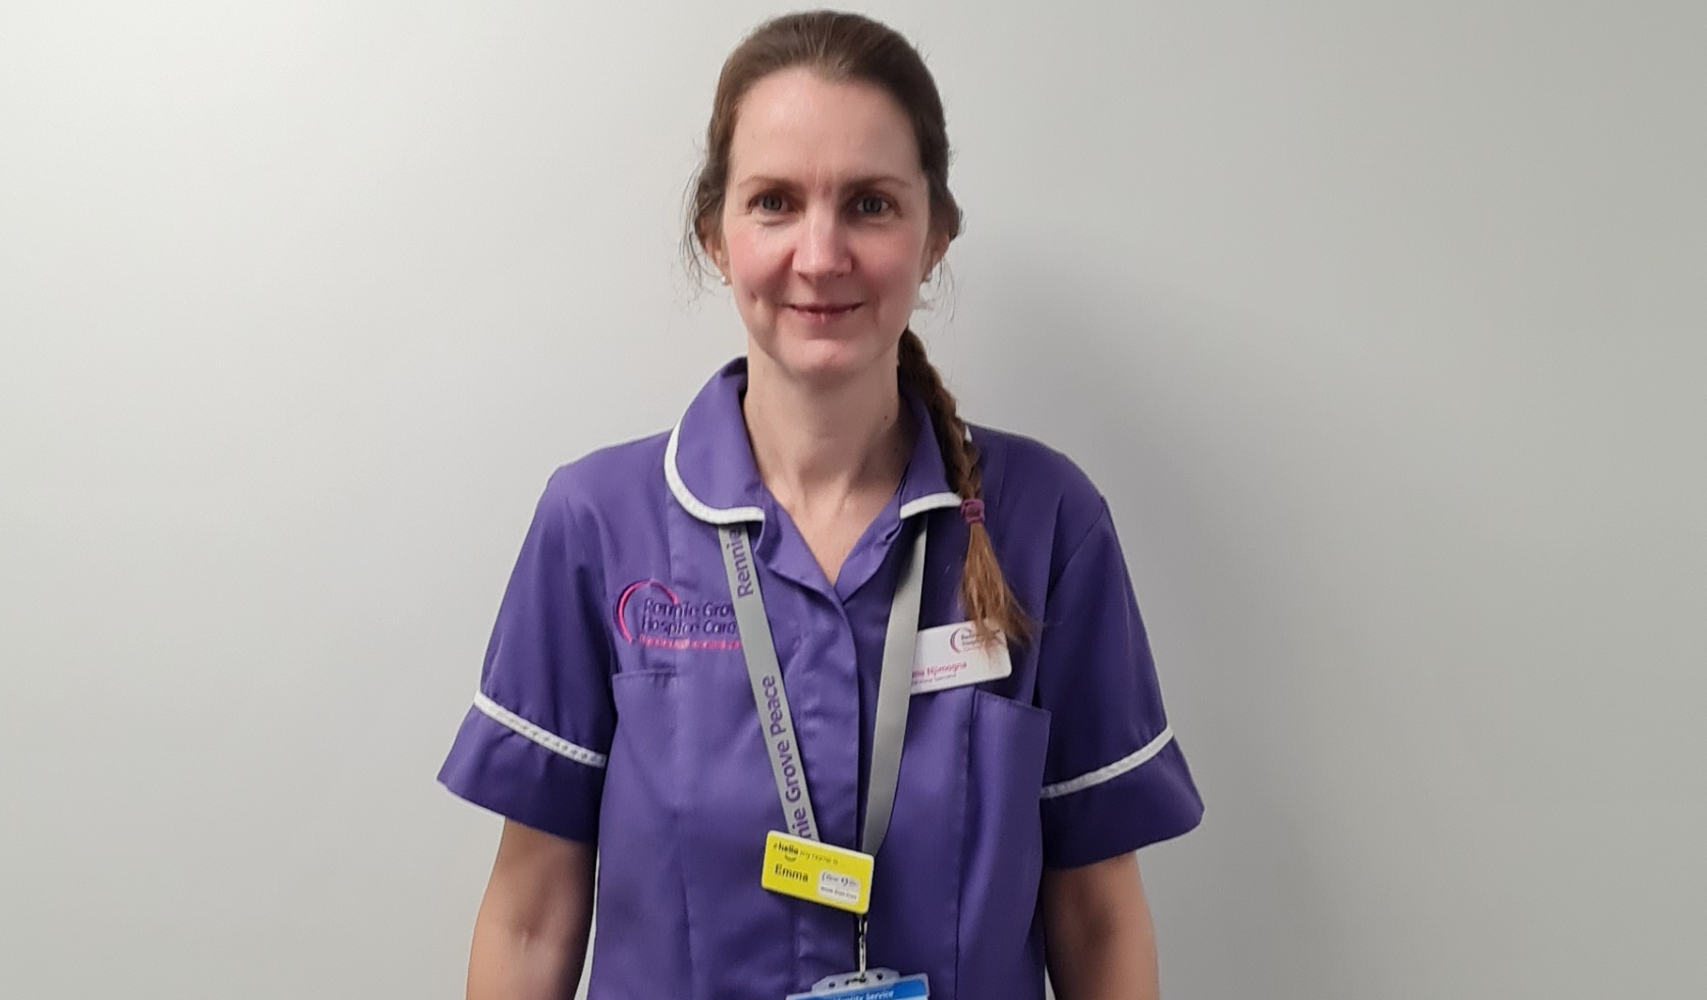 A Day in the Life of a Clinical Nurse Specialist